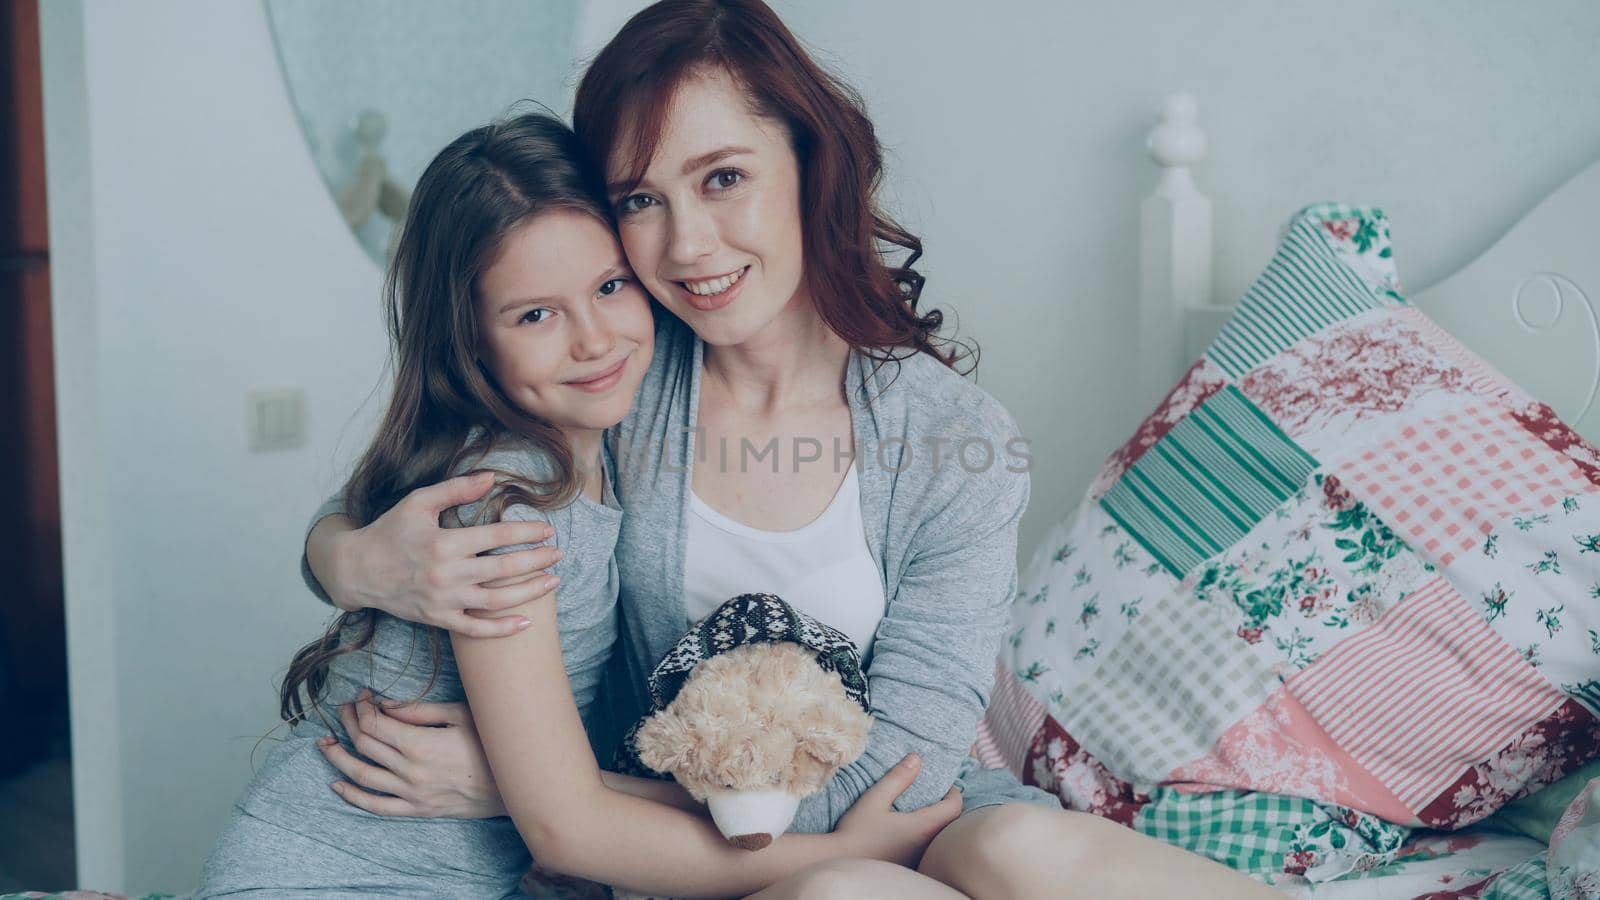 Portrait of adorable smiling girl embracing her happy mother and looking at camera together while sitting on bed in bright cozy bedroom at home